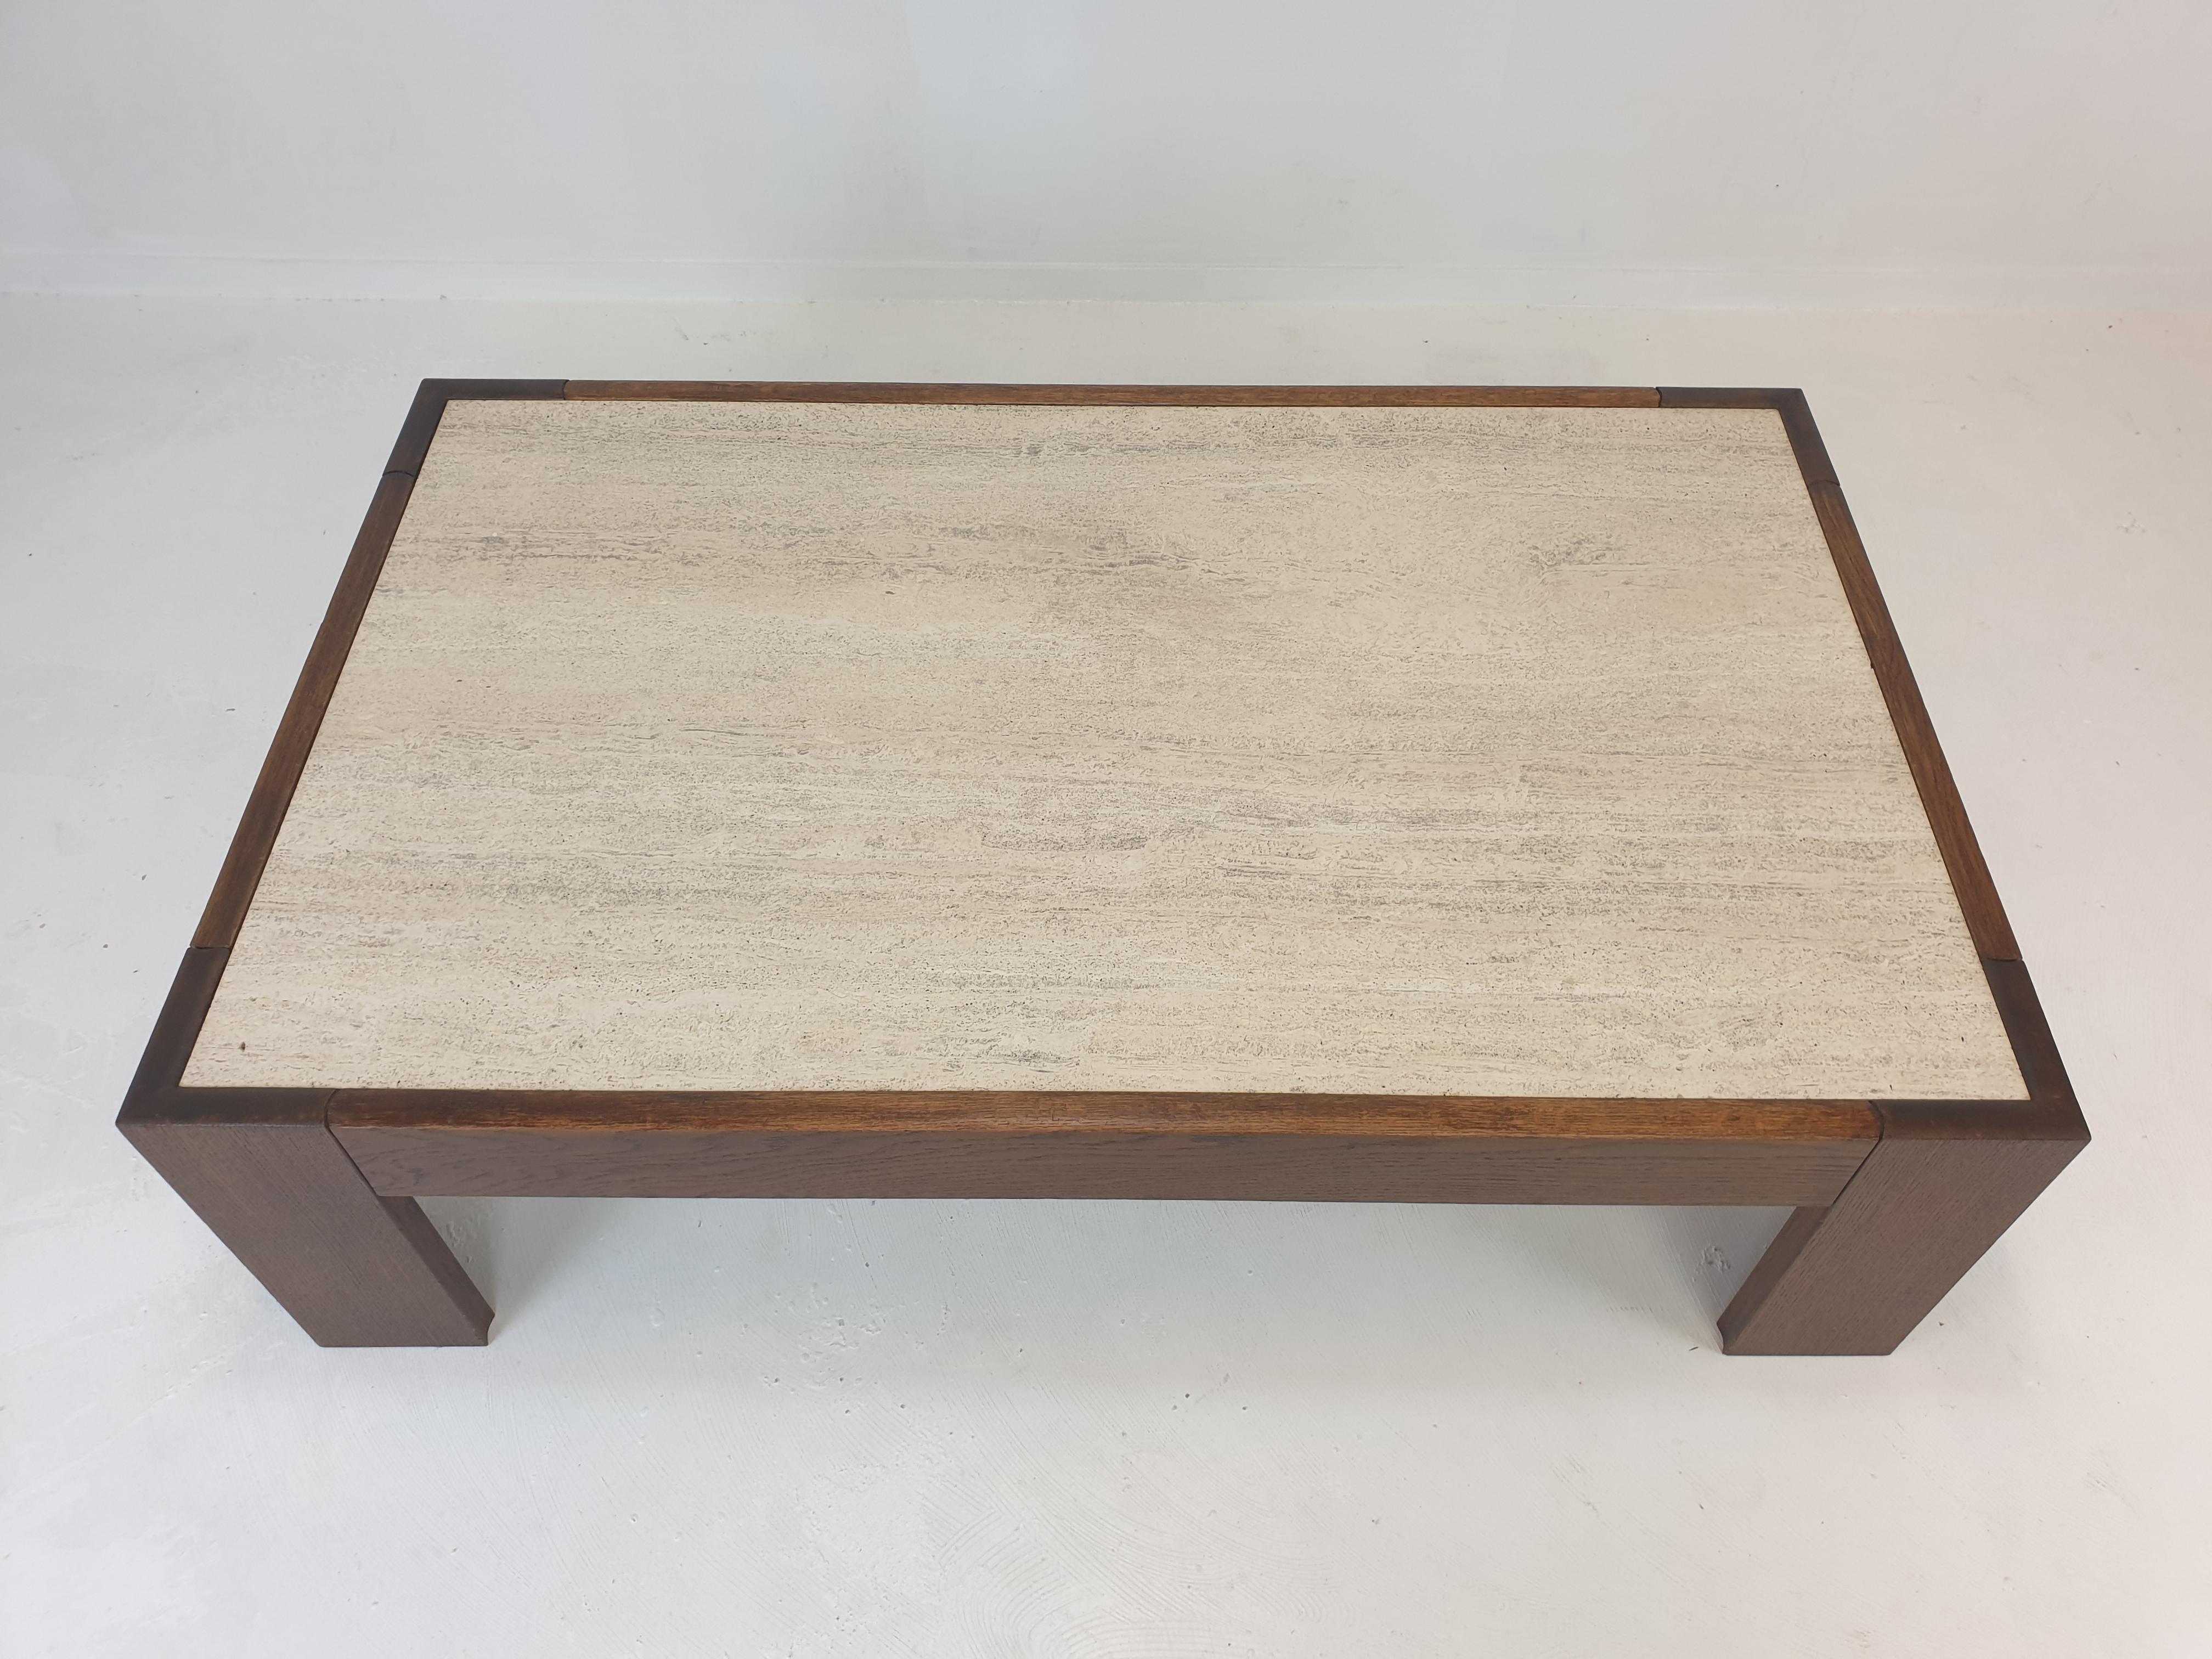 Hand-Crafted Travertine Coffee Table With Oak Base, 1970s For Sale